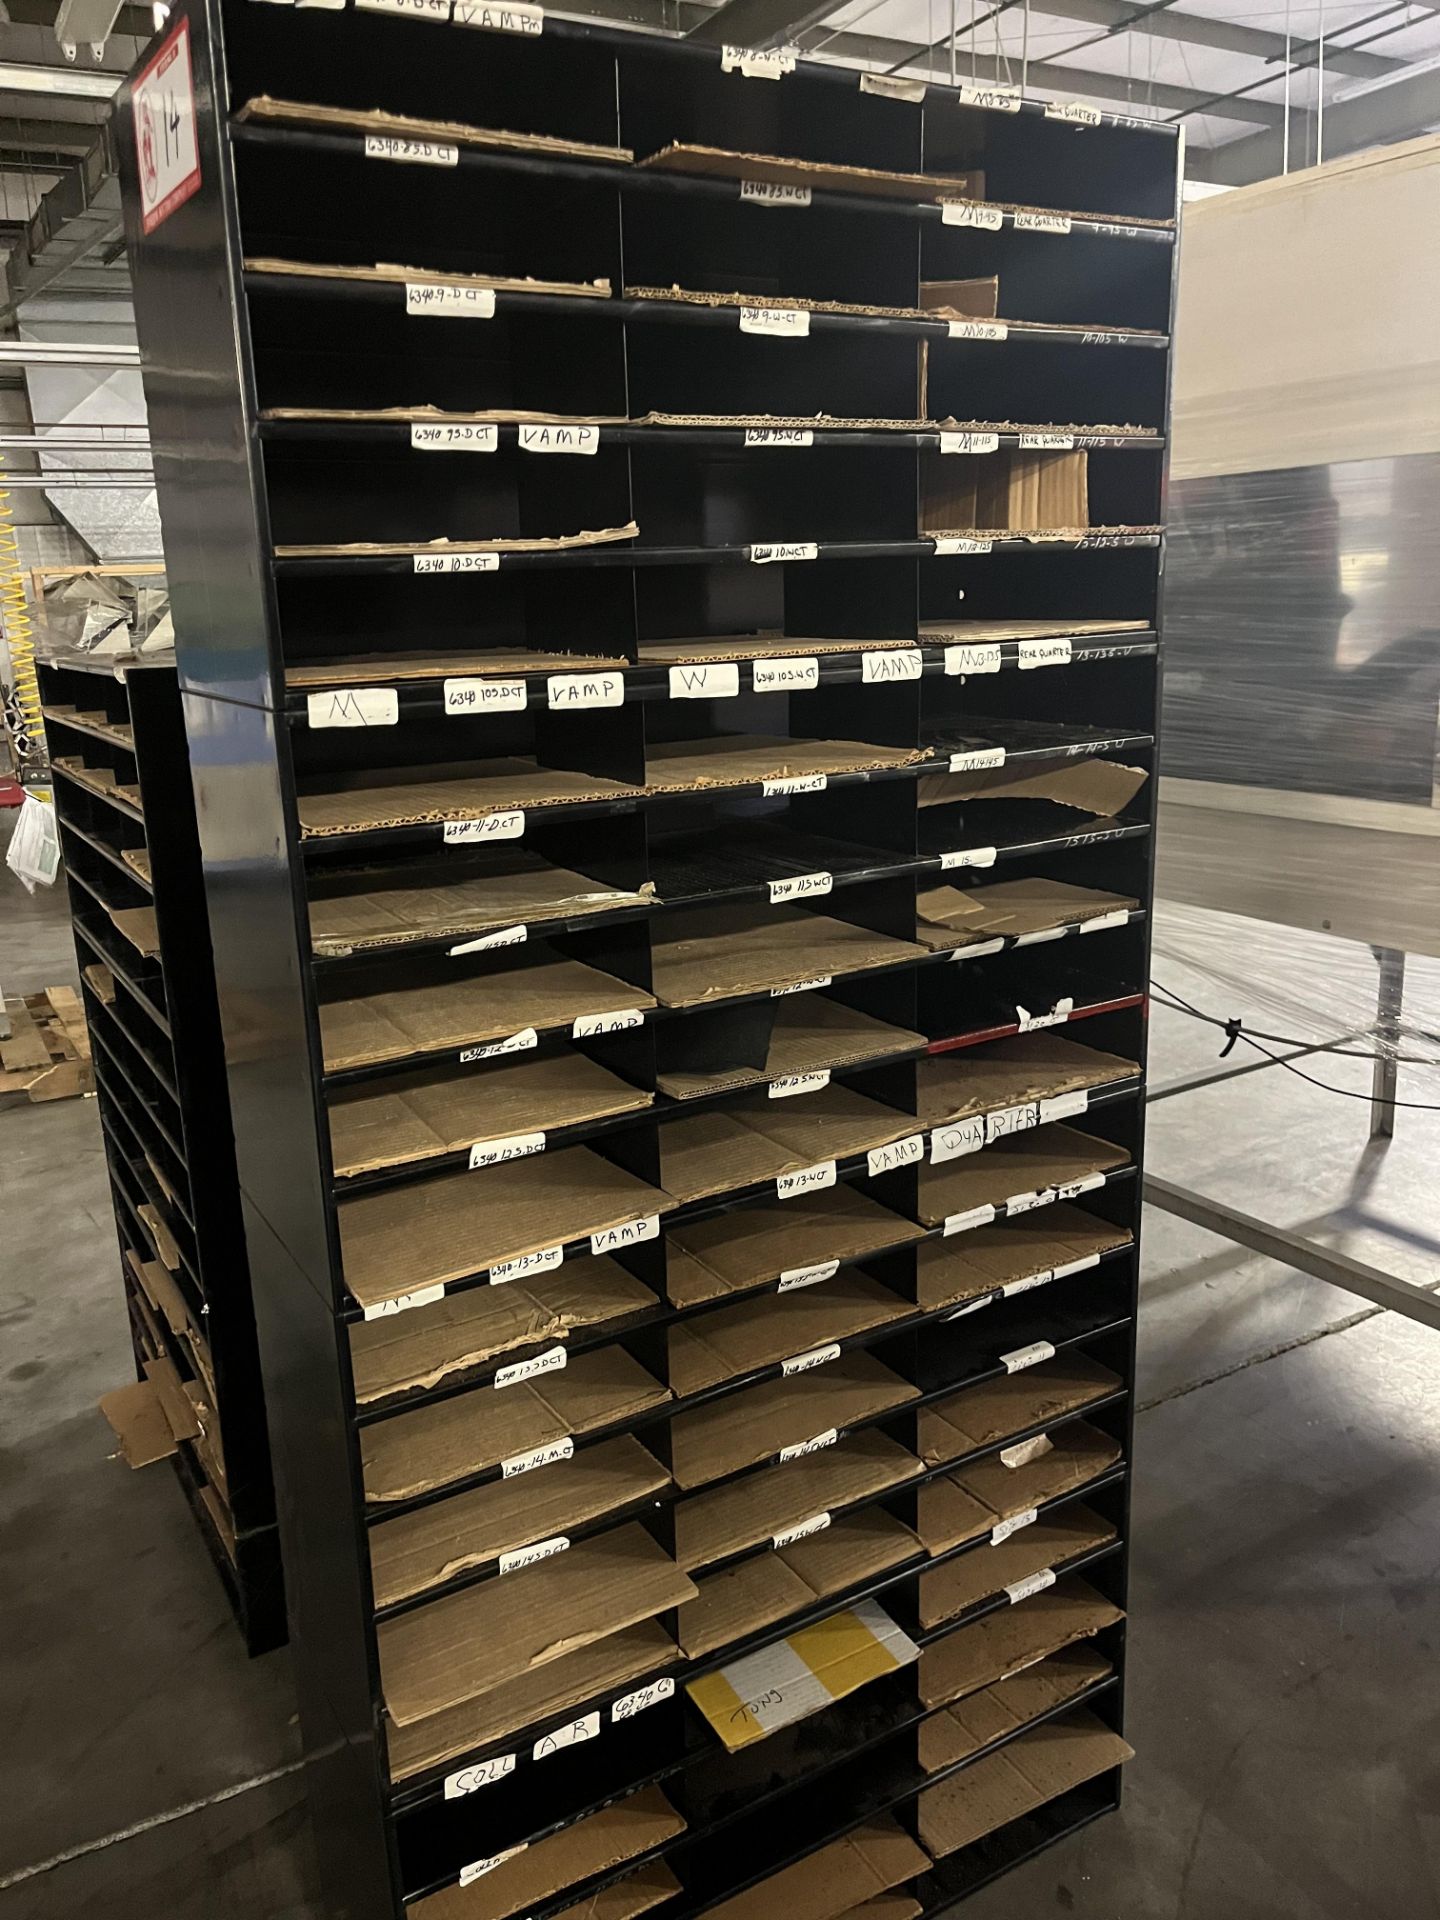 Metal cabinet, size 72in x 34in x 11.5in